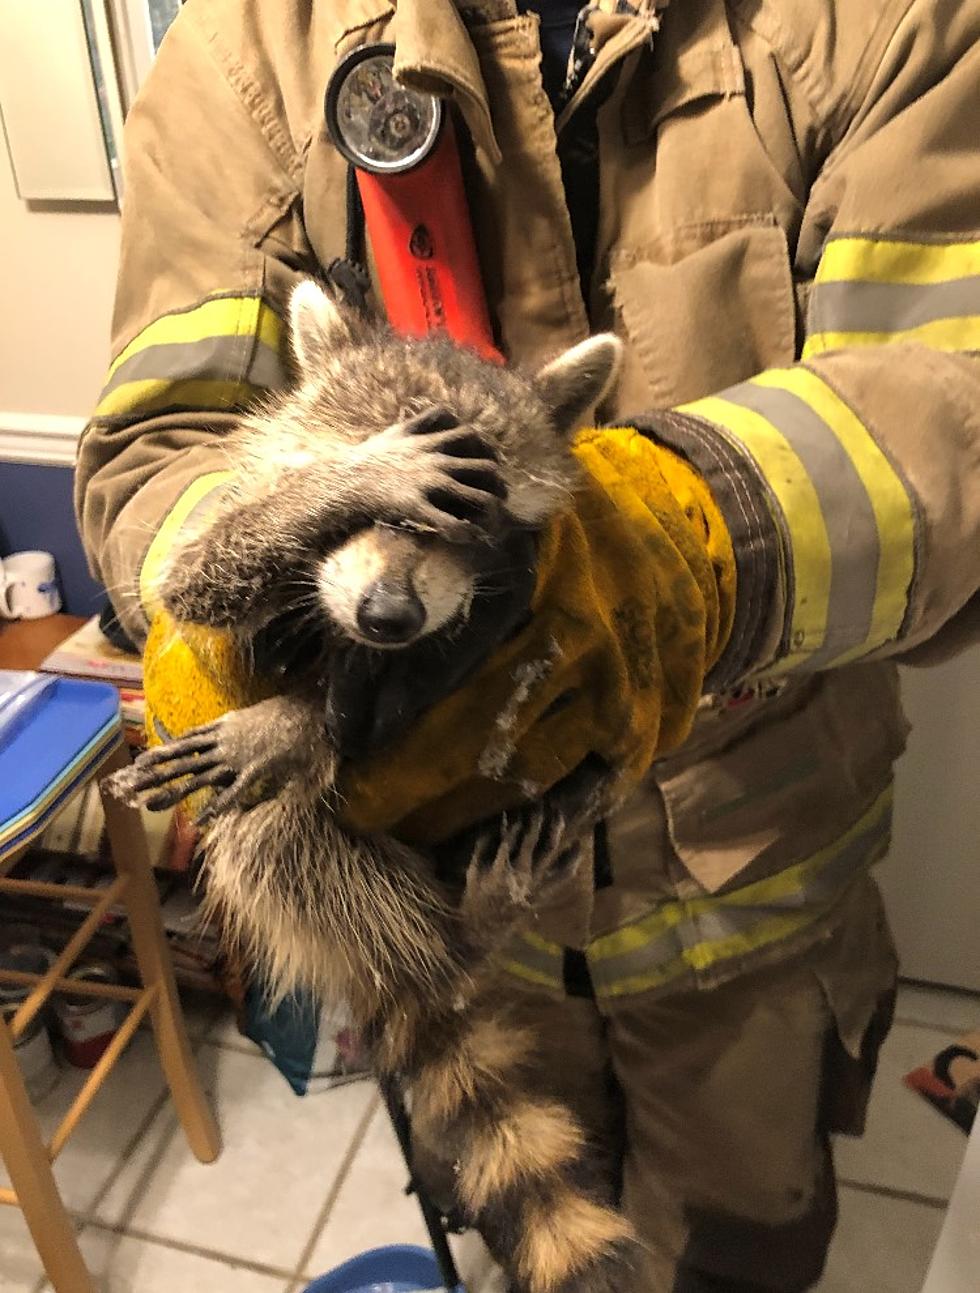 “Embarrassed Raccoon” Rescued From Home